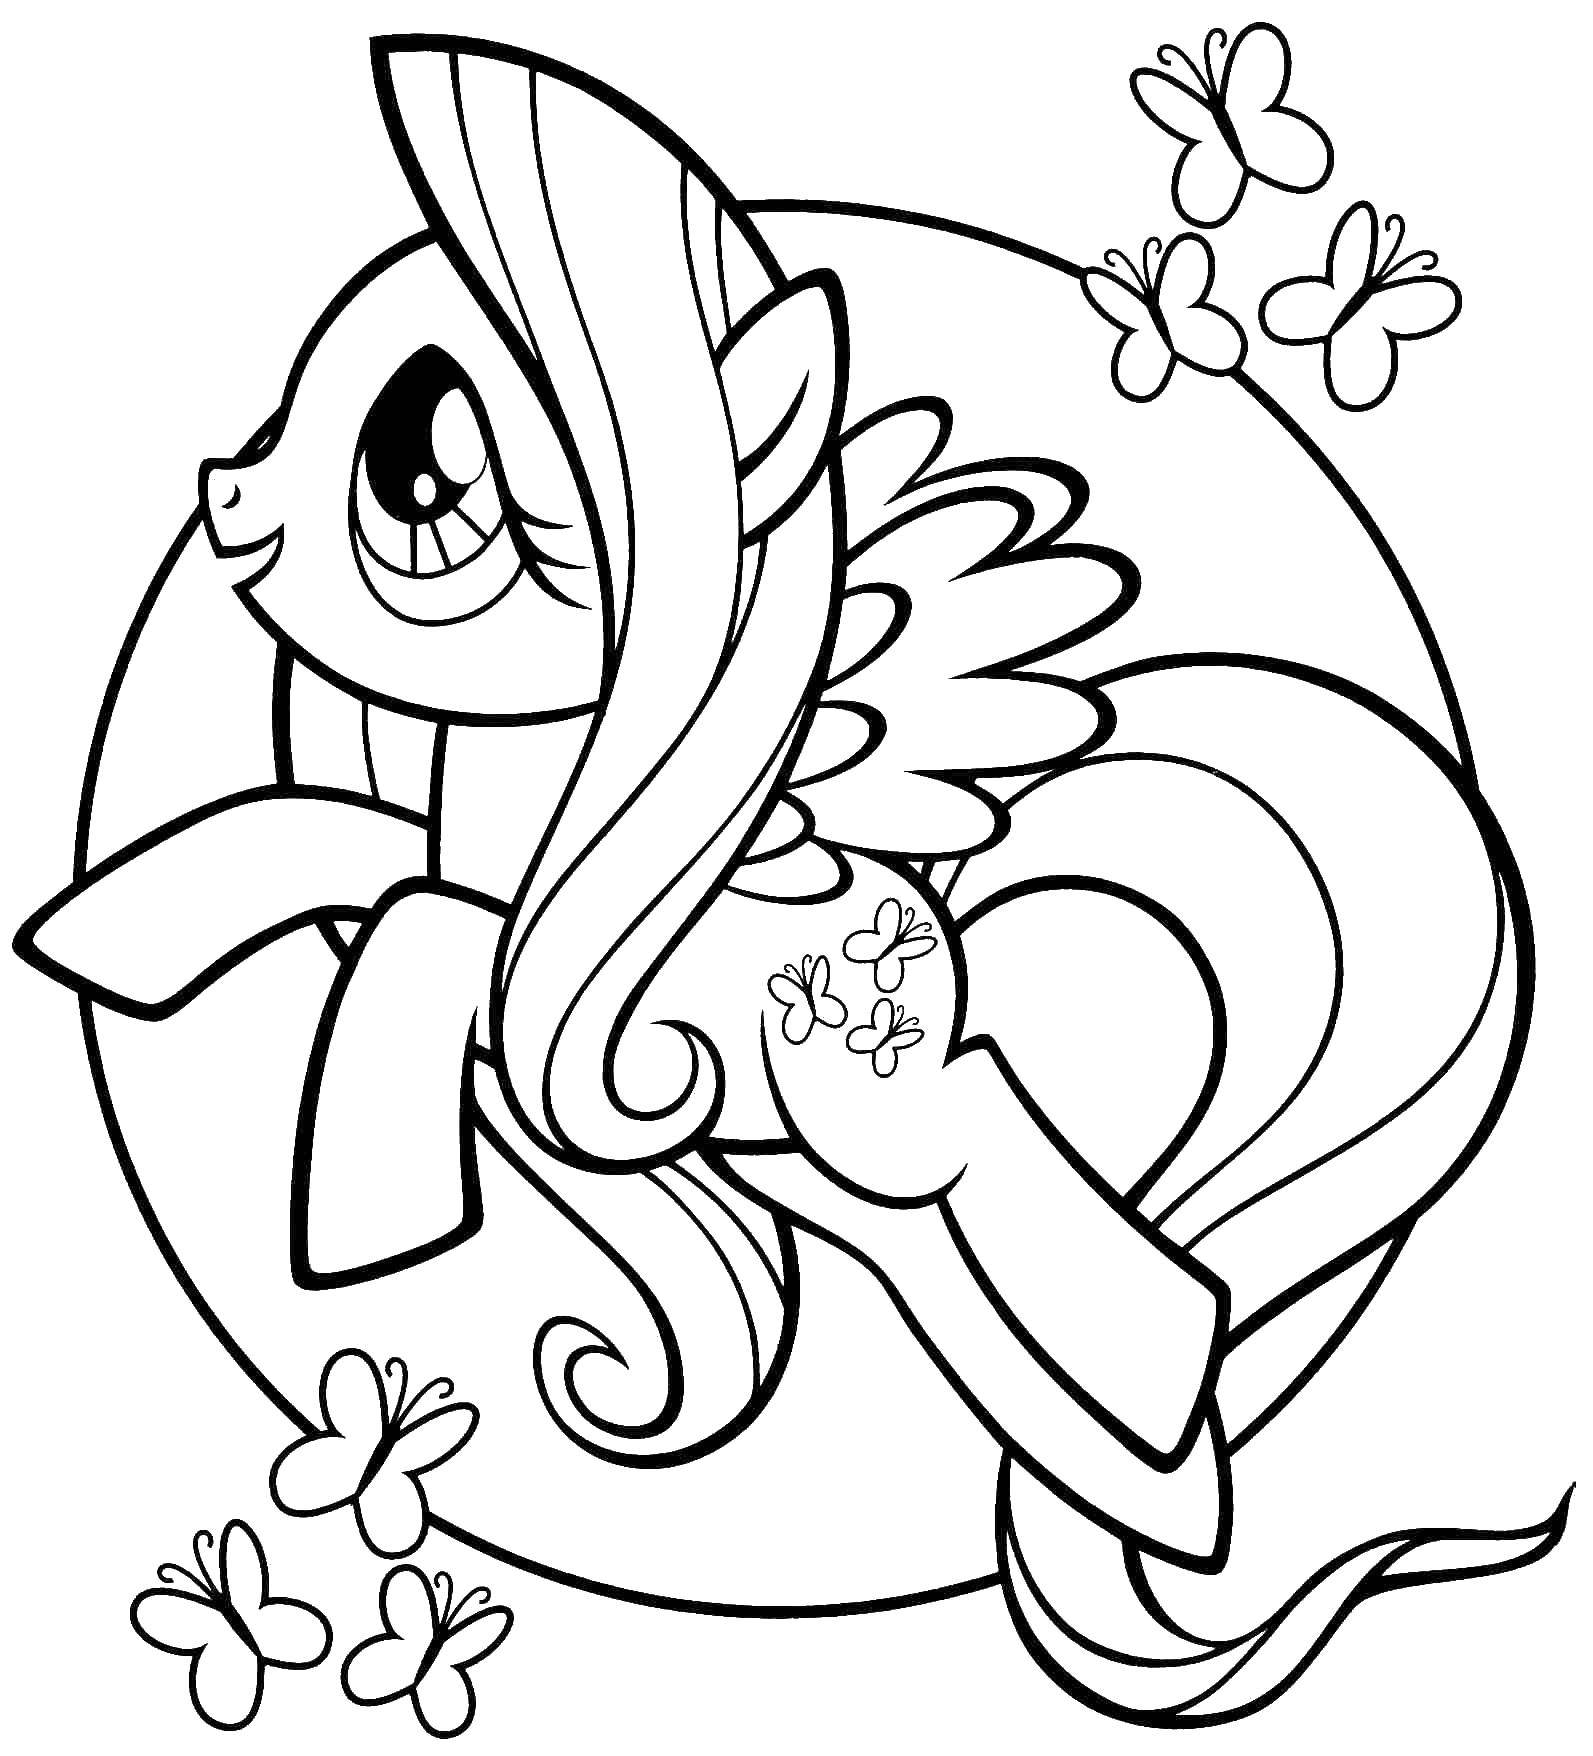 Coloring Pony. Category Ponies. Tags:  pony tale, girls.